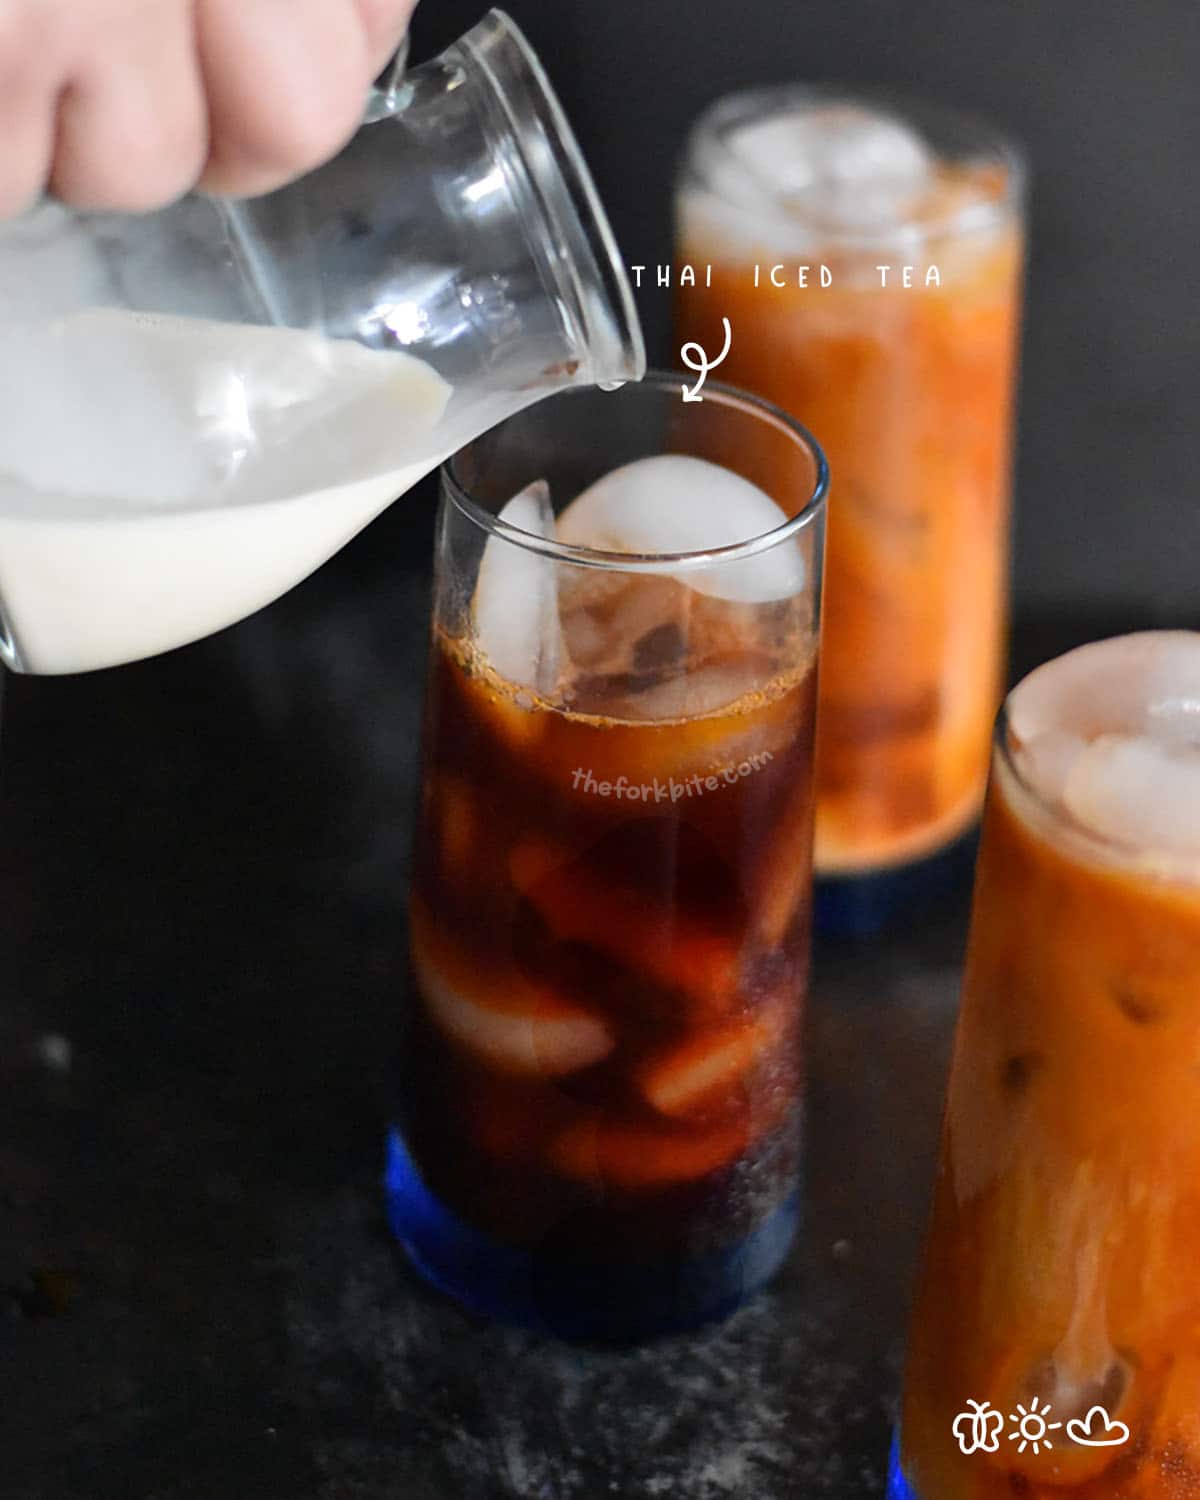 In this post, I'll give you the scoop on how much caffeine is in Thai iced tea, and I'll also share some tips on how to reduce the amount of caffeine in your drink.